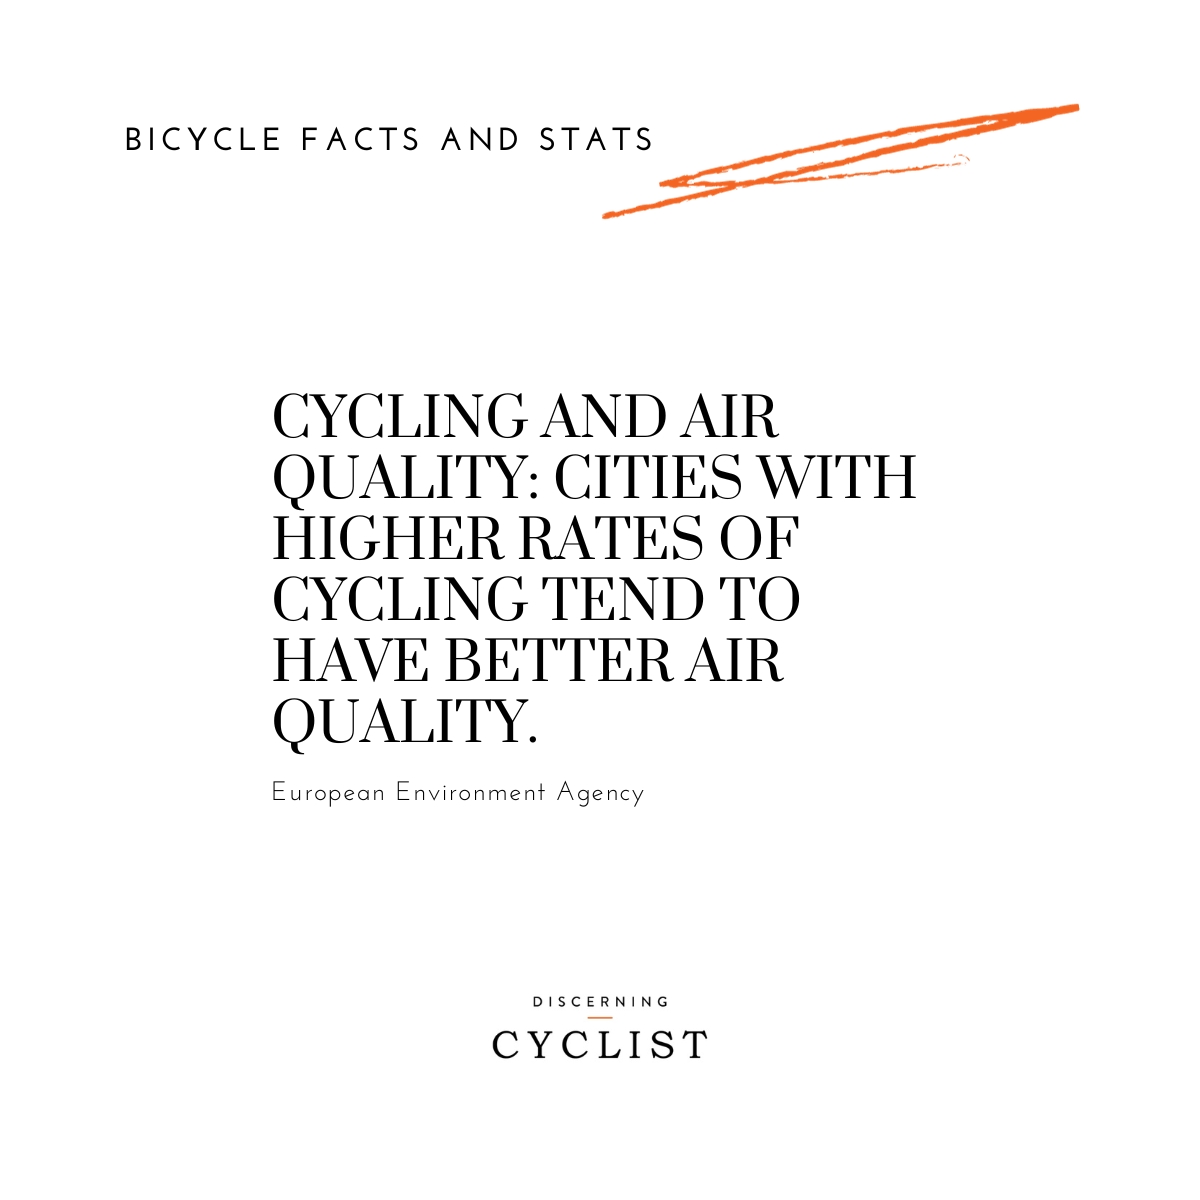 Cycling and Air Quality: Cities with higher rates of cycling tend to have better air quality.